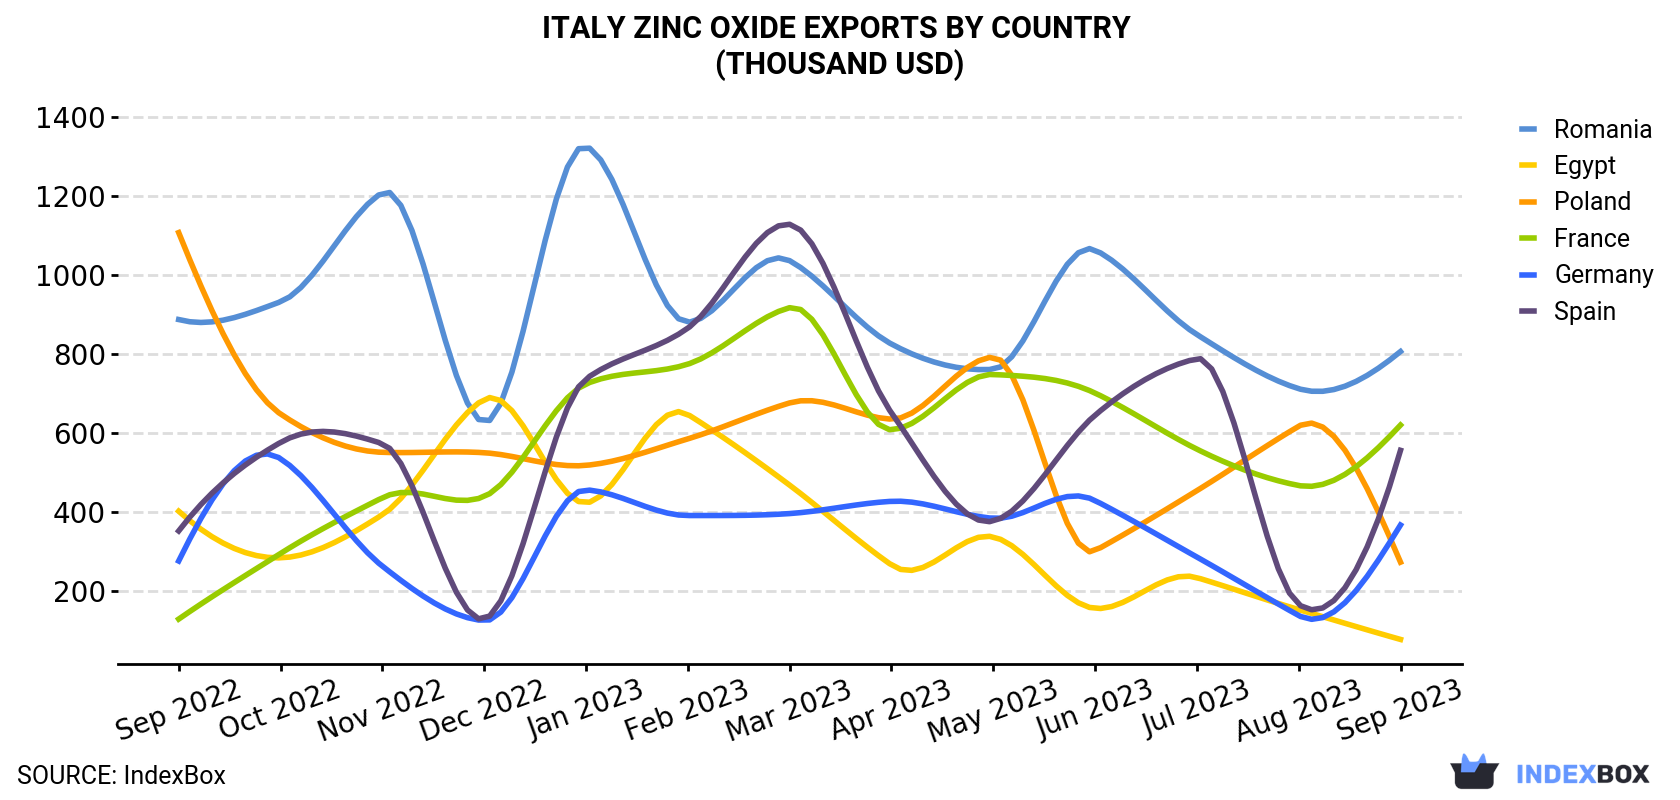 Italy Zinc Oxide Exports By Country (Thousand USD)